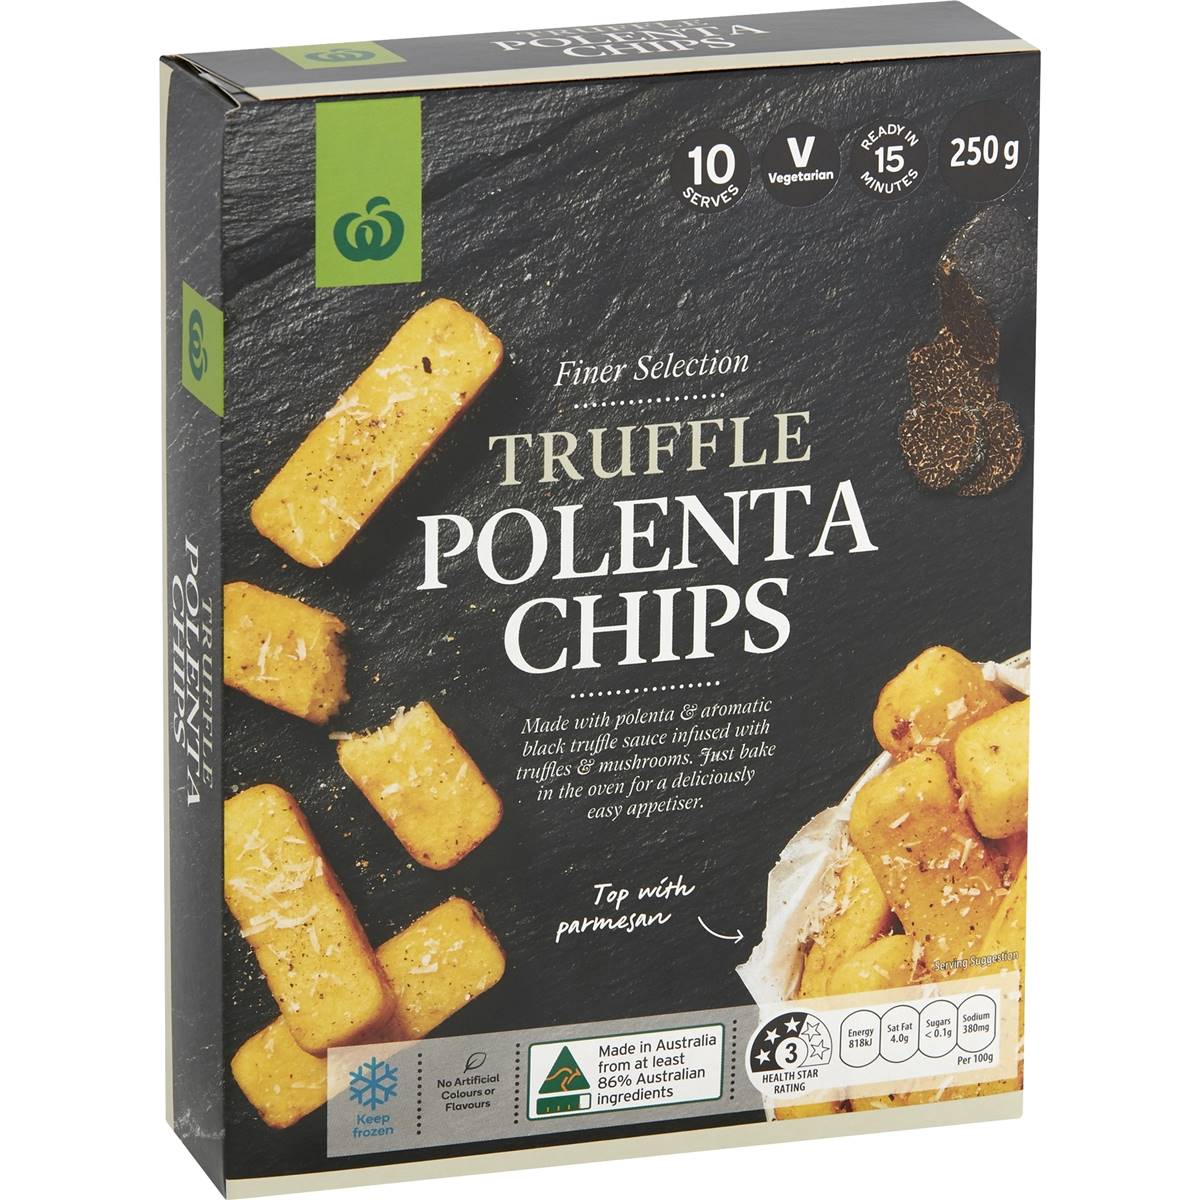 Calories in Woolworths Truffle Polenta Chip